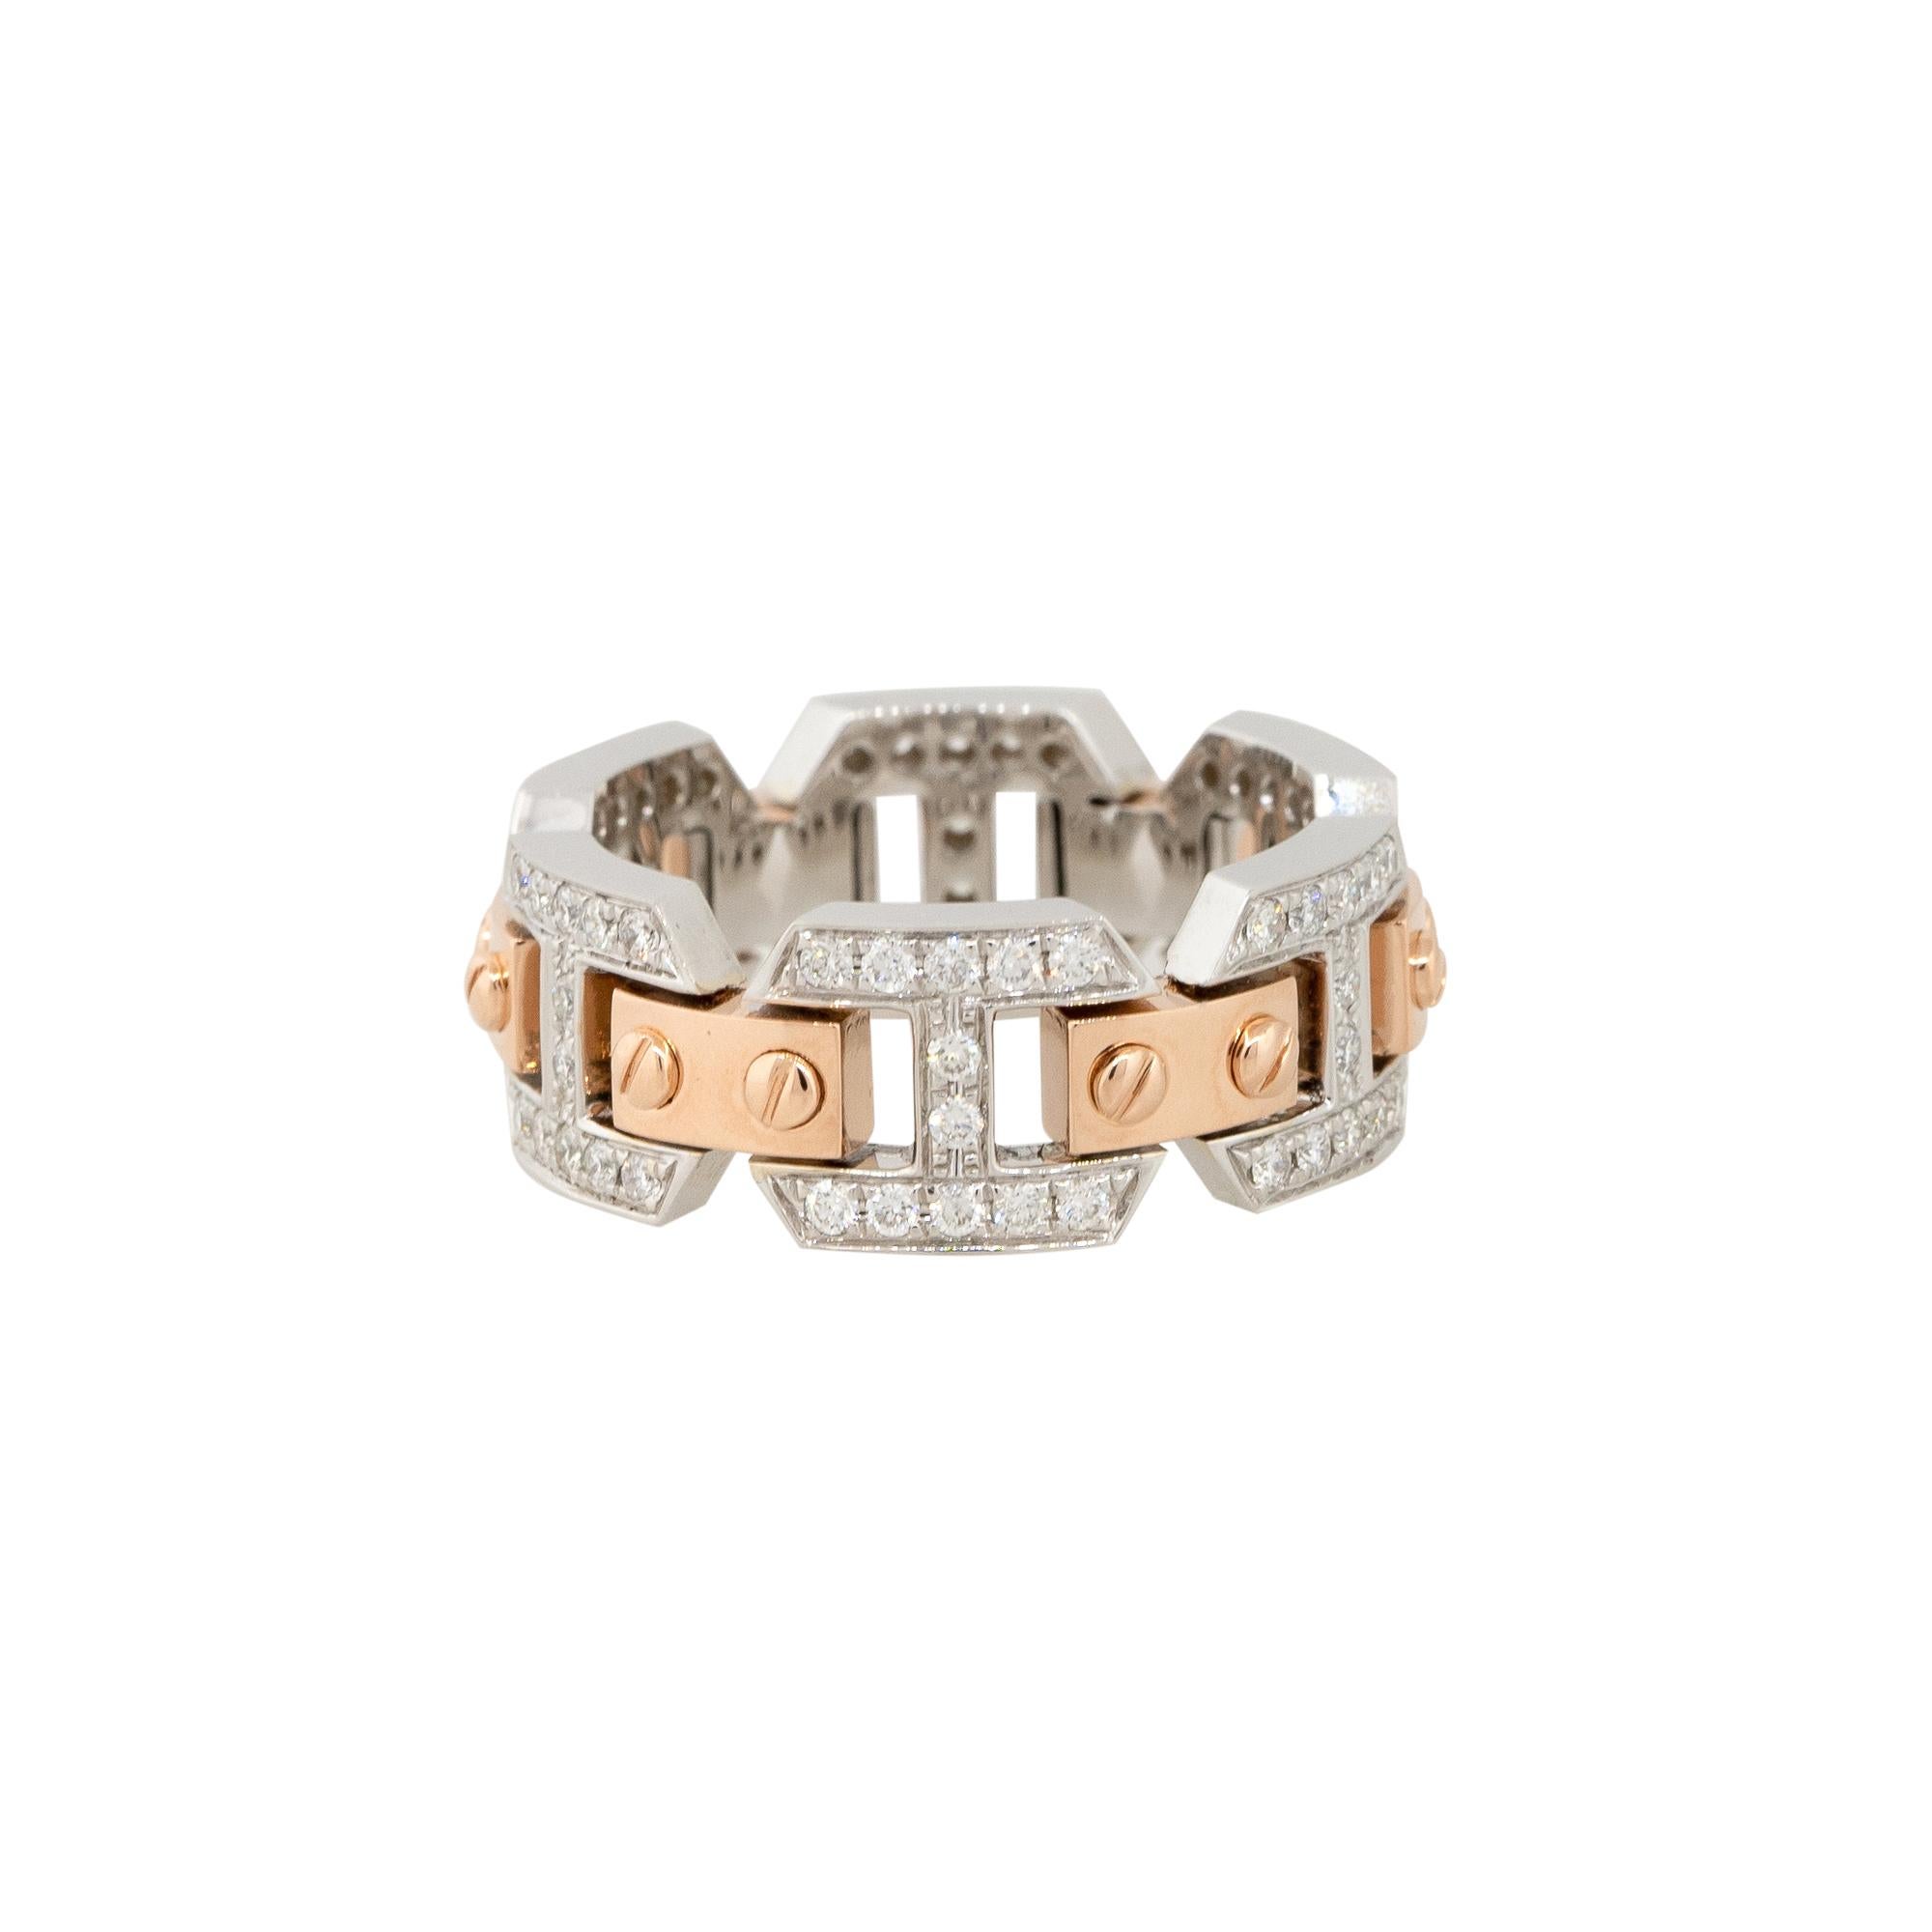 18k White and Rose Gold 0.71ctw Pave Diamond Link Band
Style: Women's Diamond Link Band
Material: 18k White Gold and 18k Rose Gold
Main Diamond Details: Approximately 0.71ctw of Round Brilliant cut Diamonds
Ring Size: 6.5 (Cannot be sized)
Item